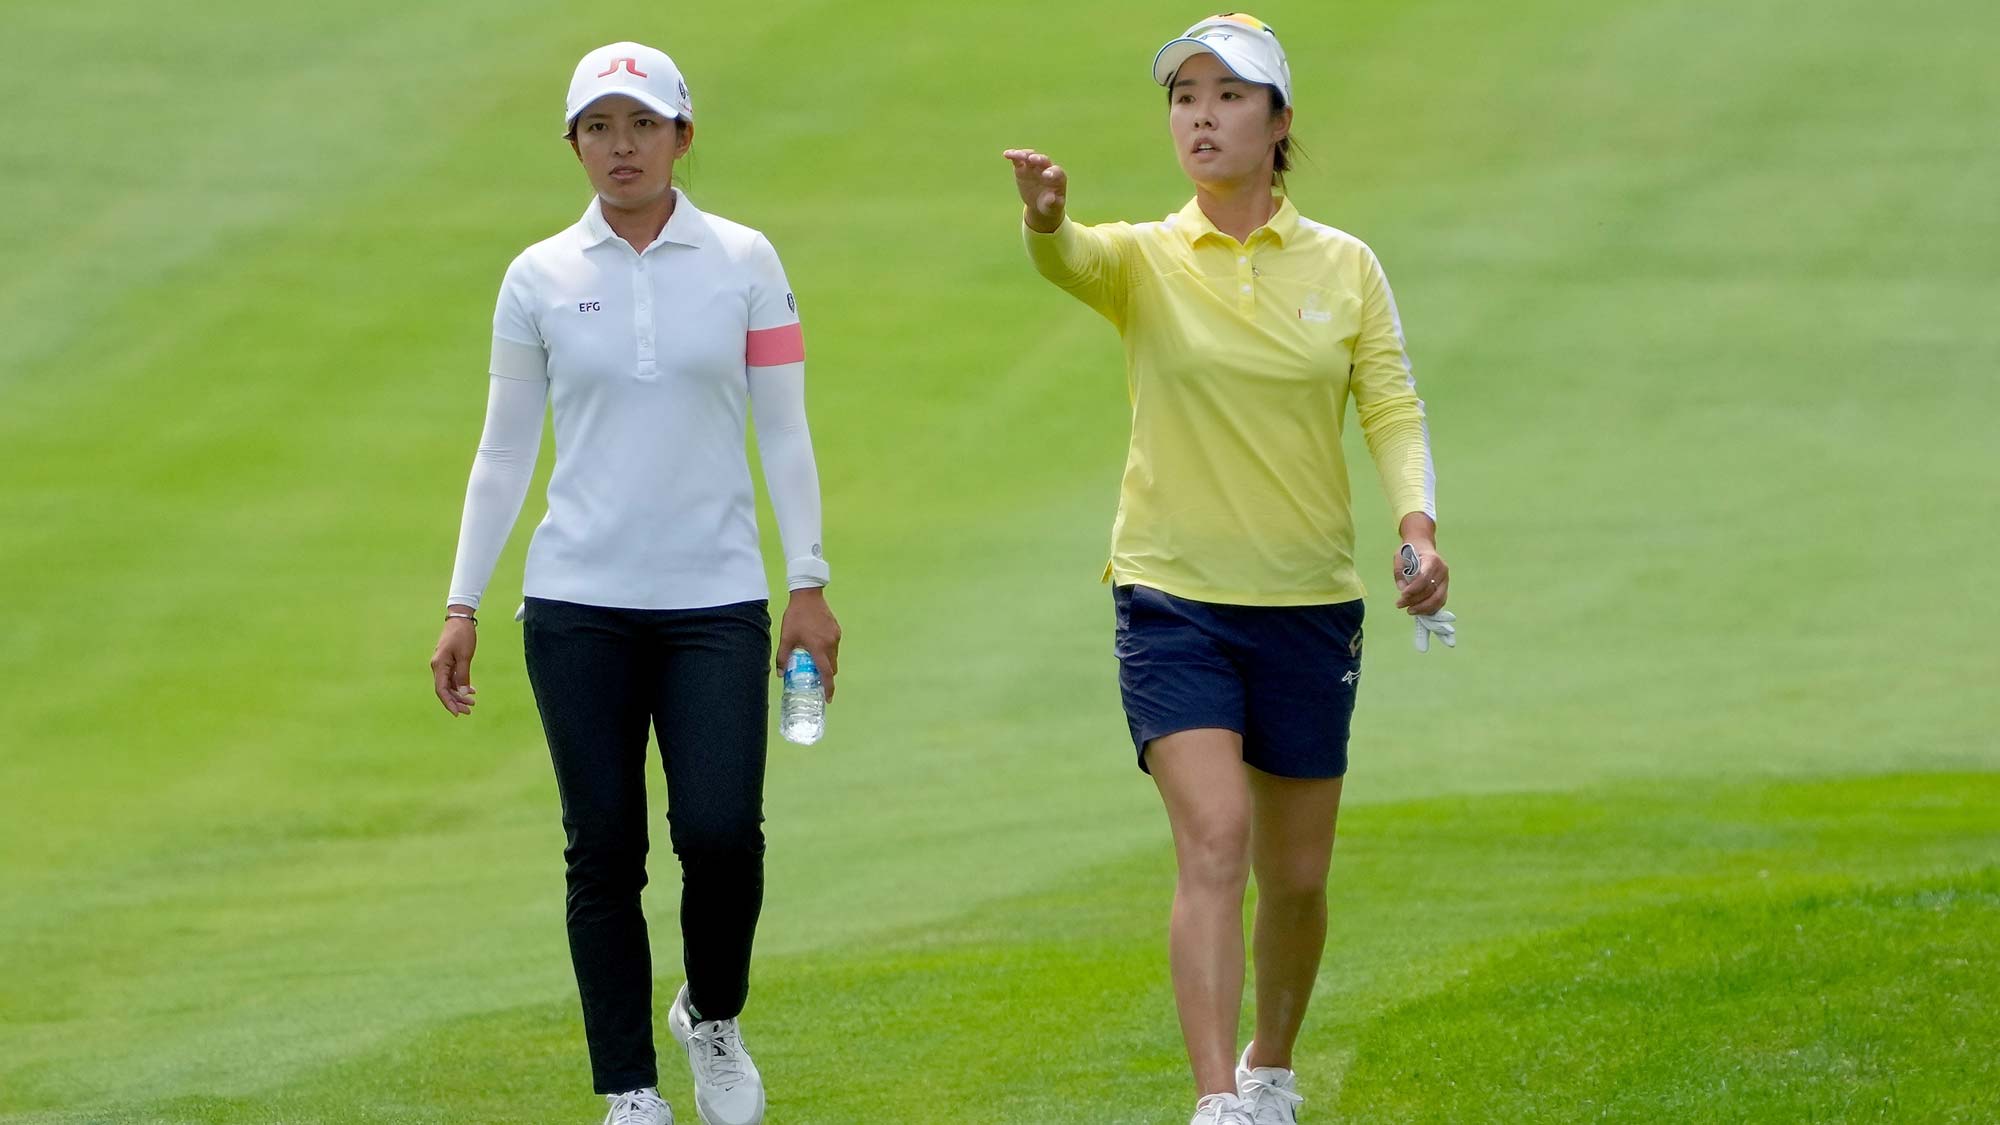 Tiffany Chan of Hong Kong (L) and Haeji Kang of South Korea walk across the fifth hole during the third round of the Dow Great Lakes Bay Invitational